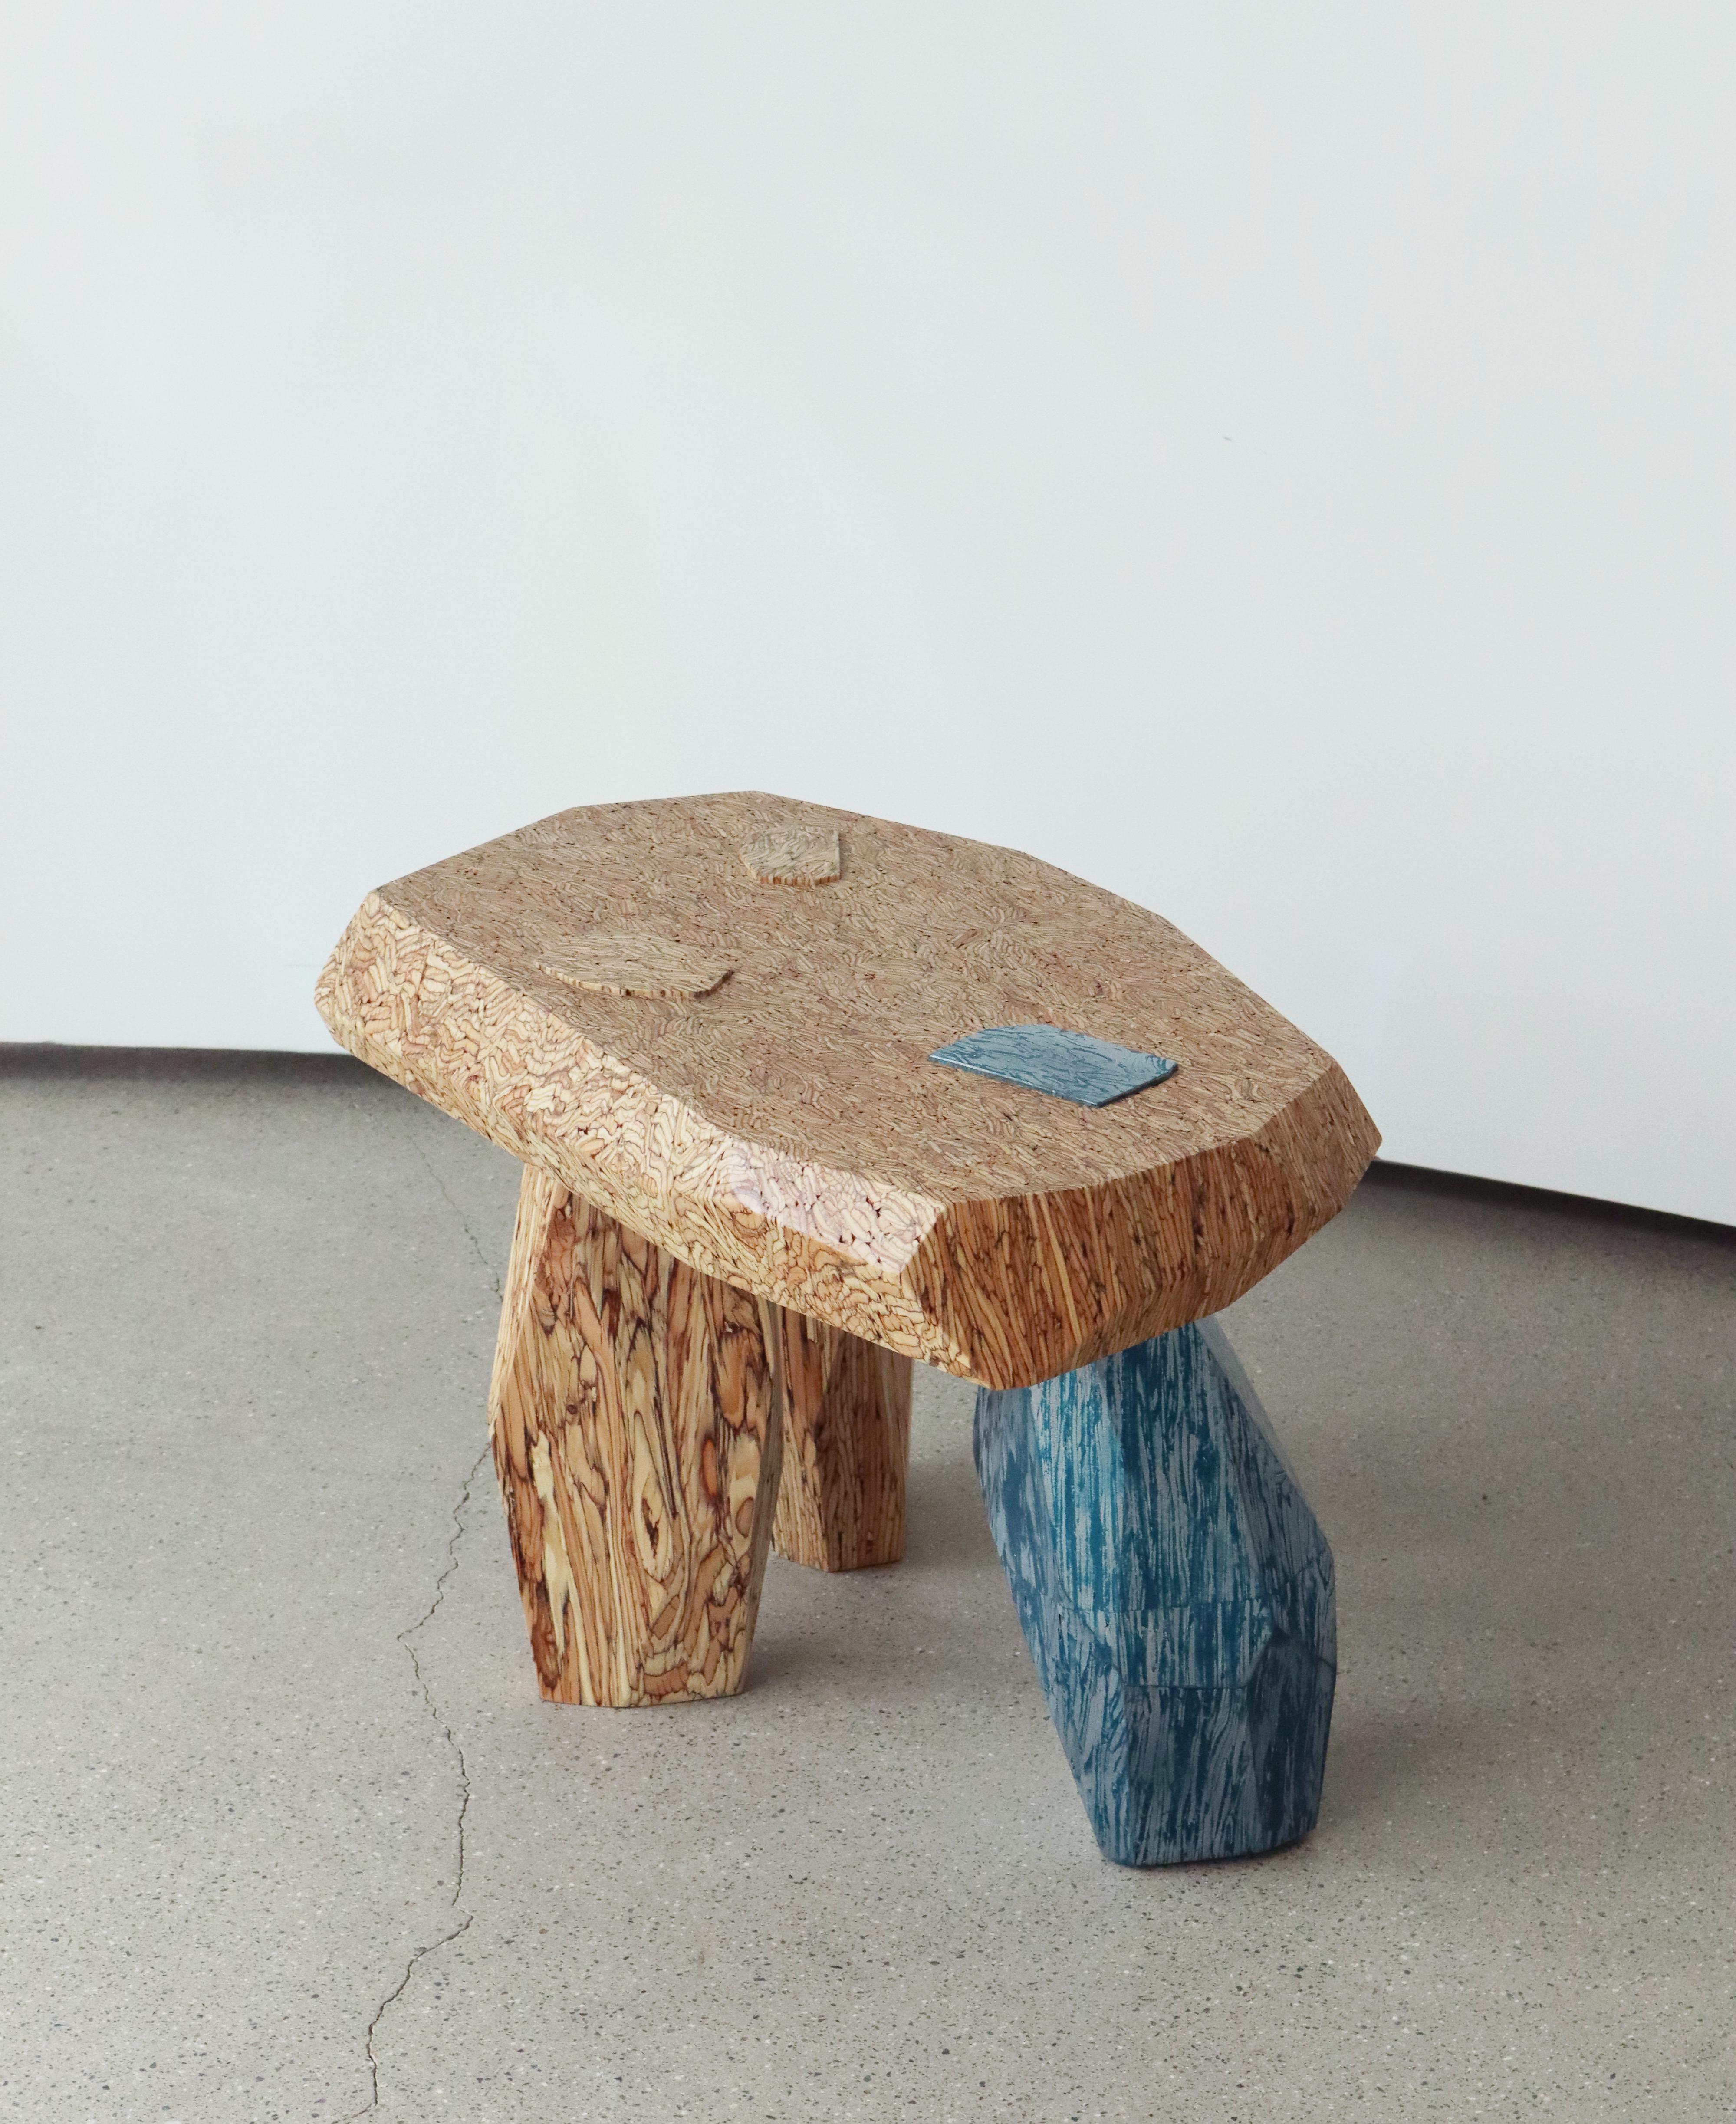 Designer Jongwon Lee happened to stumble upon a new material that sparked his interest. PSL (Parallel Strand Lumber) is made of dried and graded wood veneers, strands or flakes that are layered and bonded together with a moisture-resistant adhesive